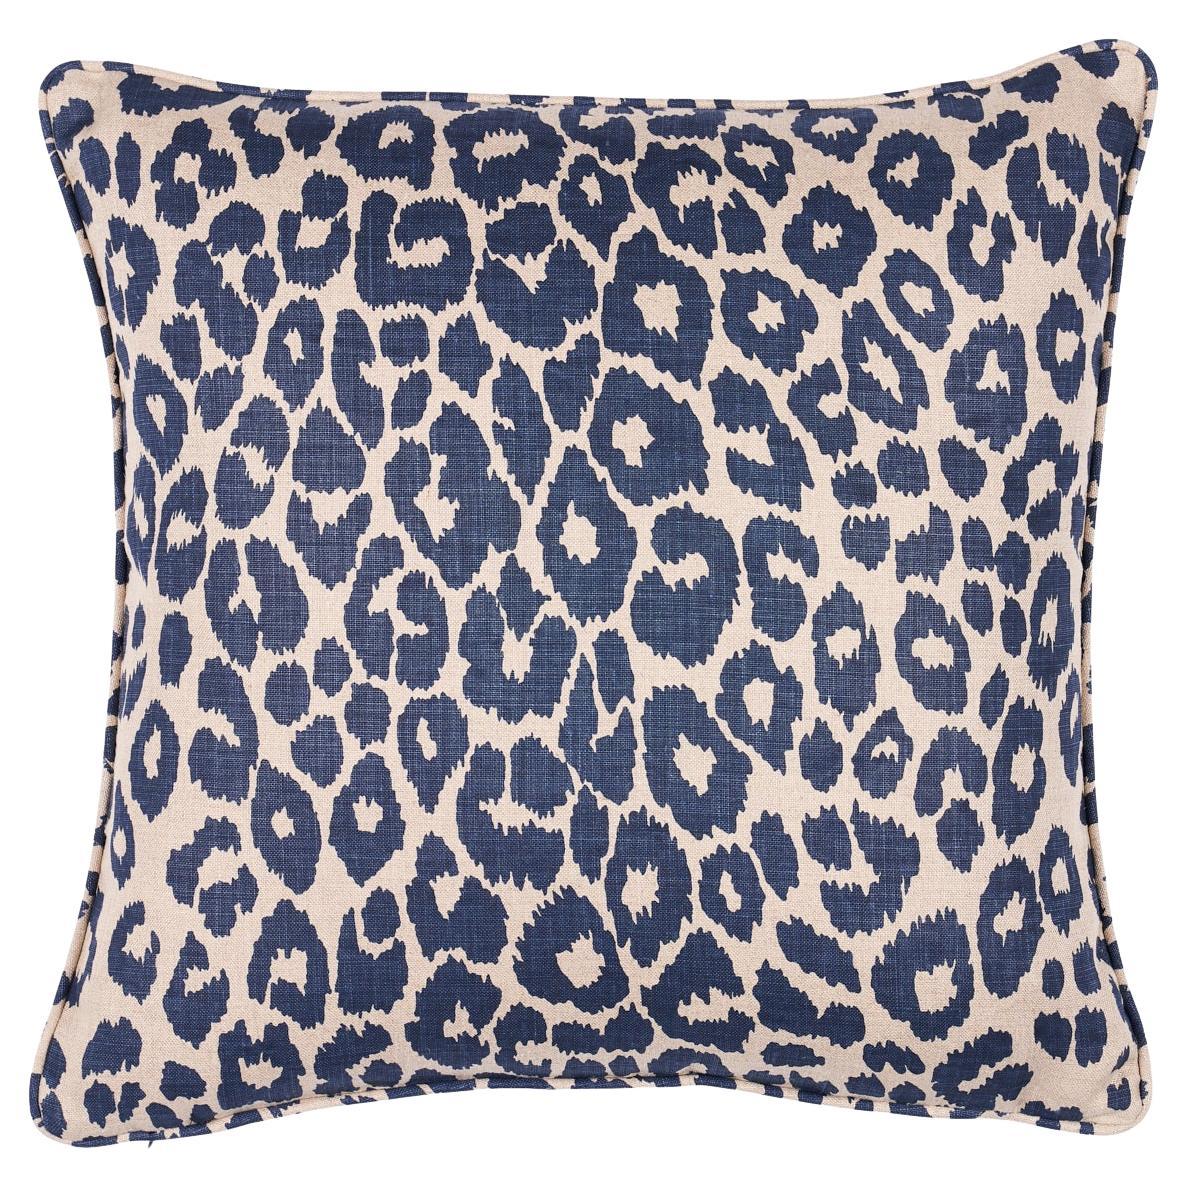 Schumacher Iconic Leopard 18" Pillow in Ink/Natural For Sale